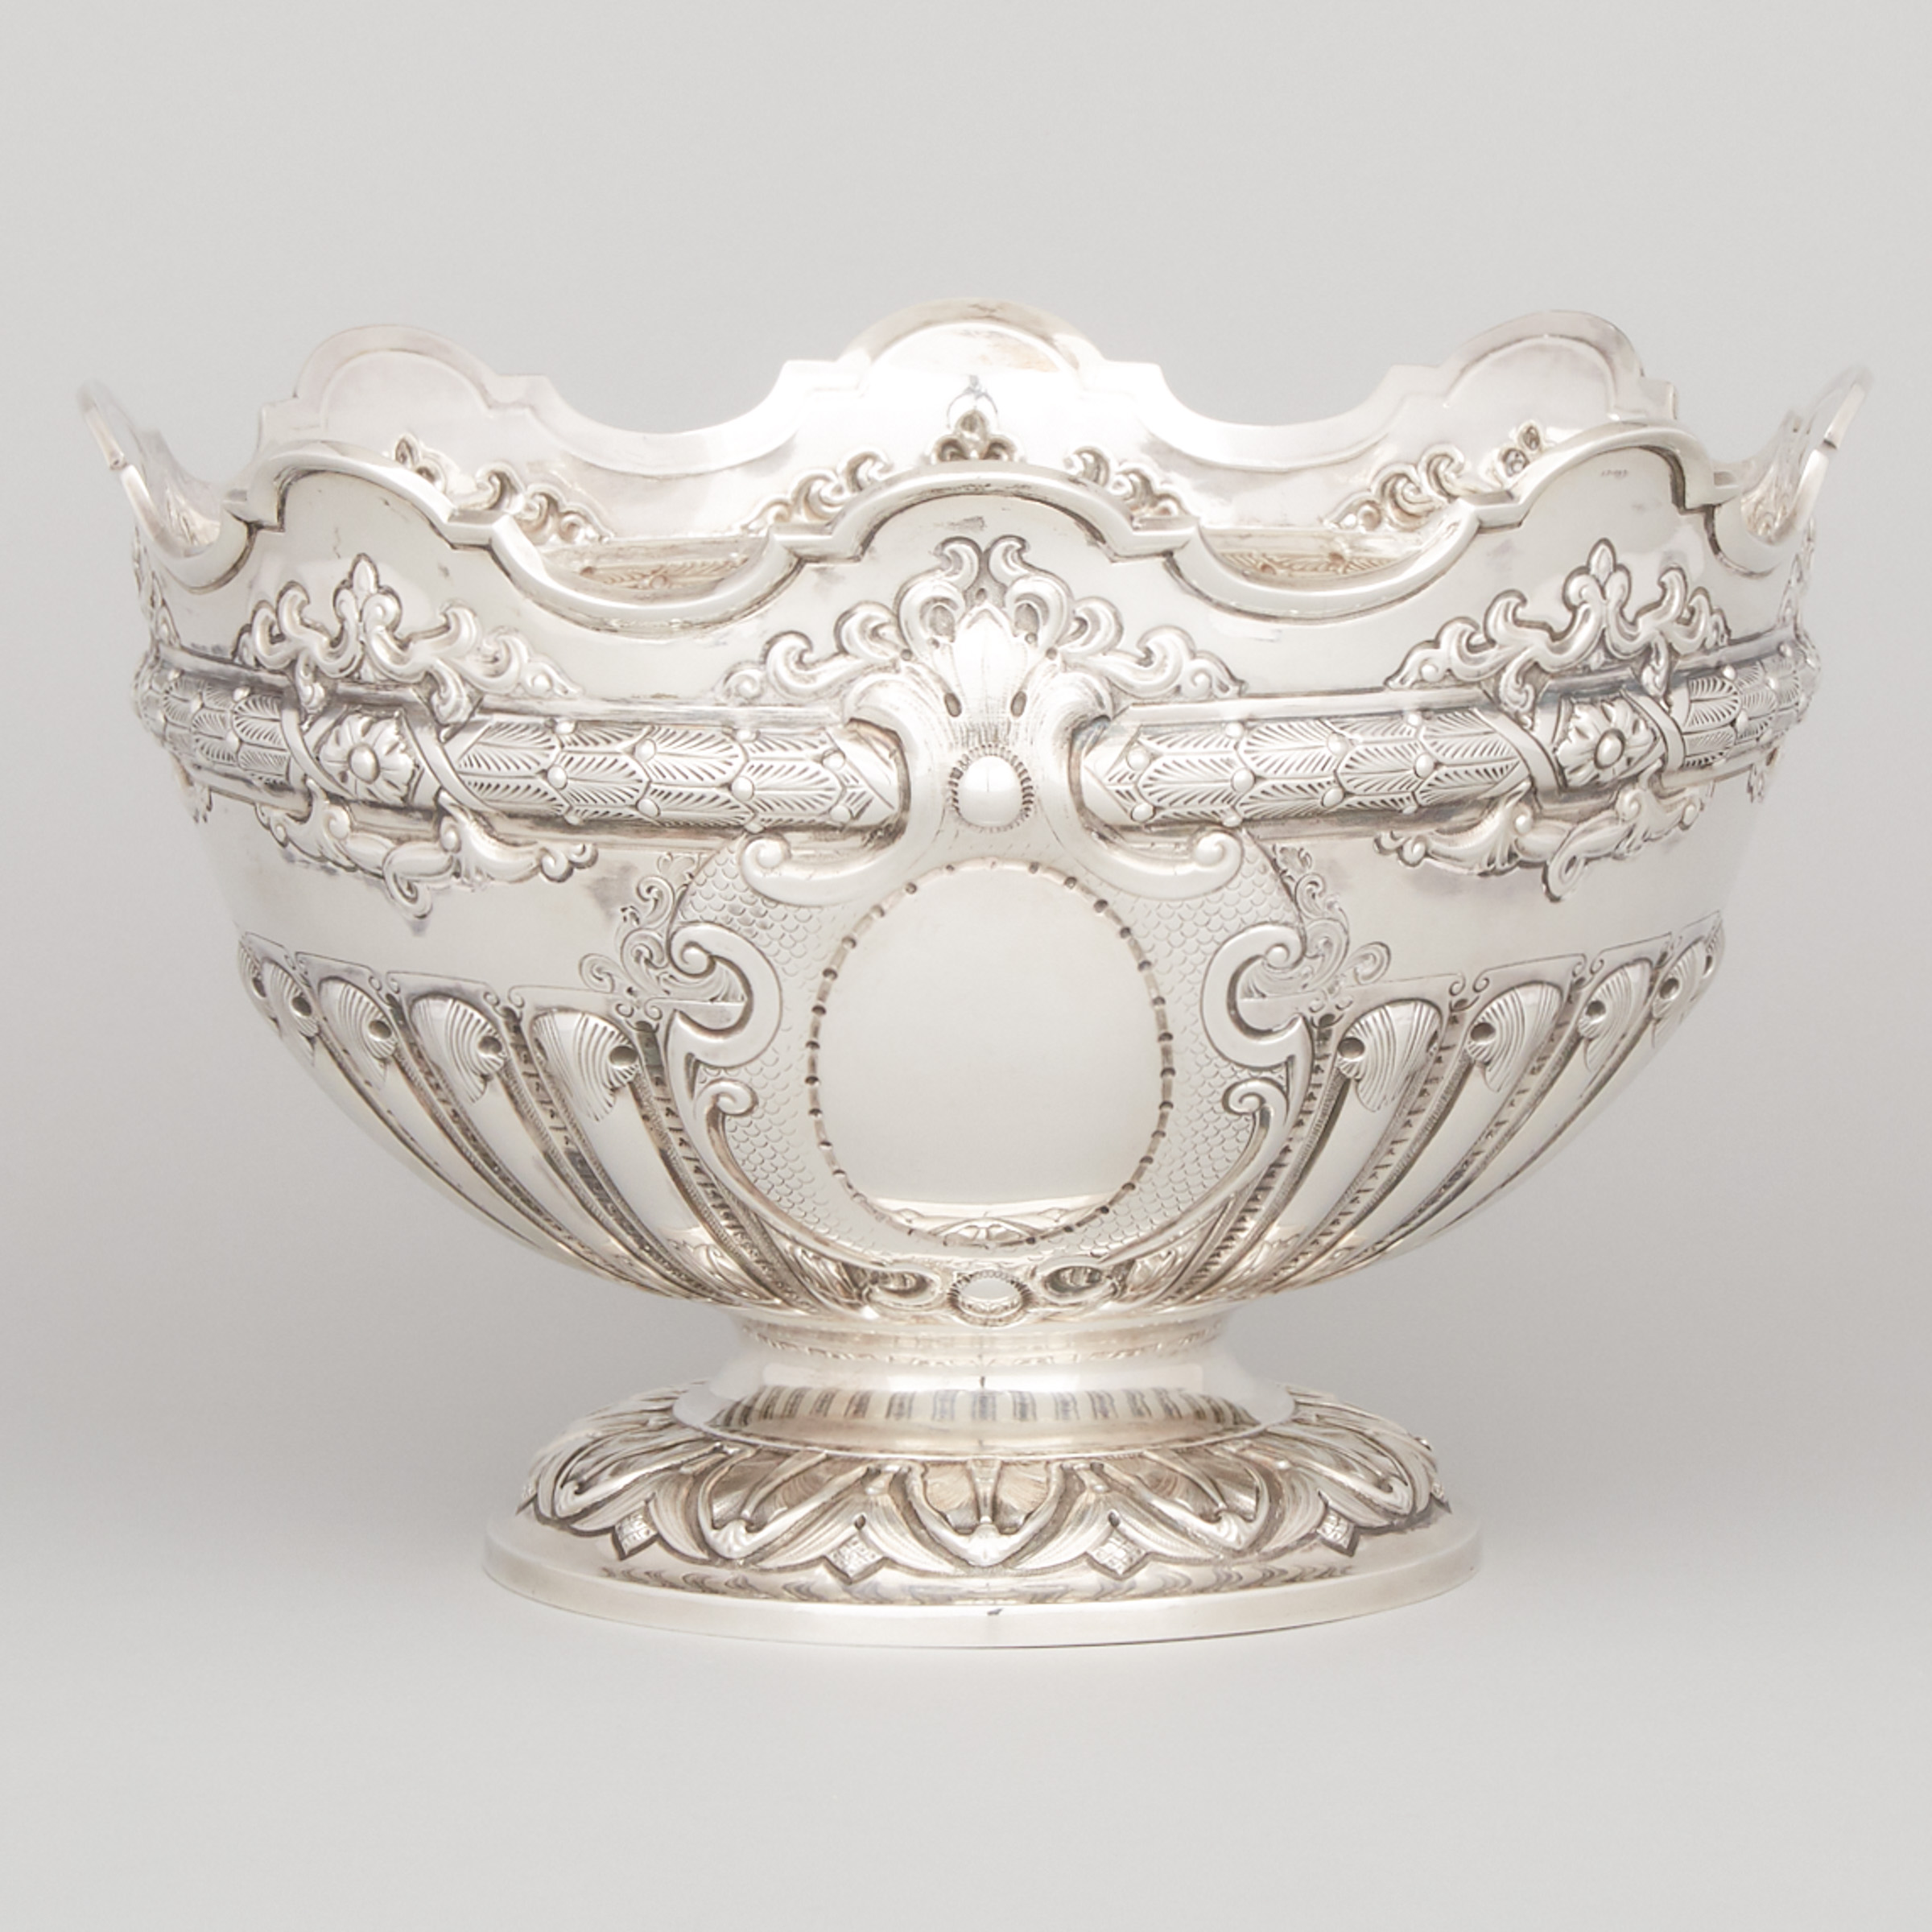 Late Victorian Silver Monteith, Sibray, Hall & Co Ltd., London, 1897